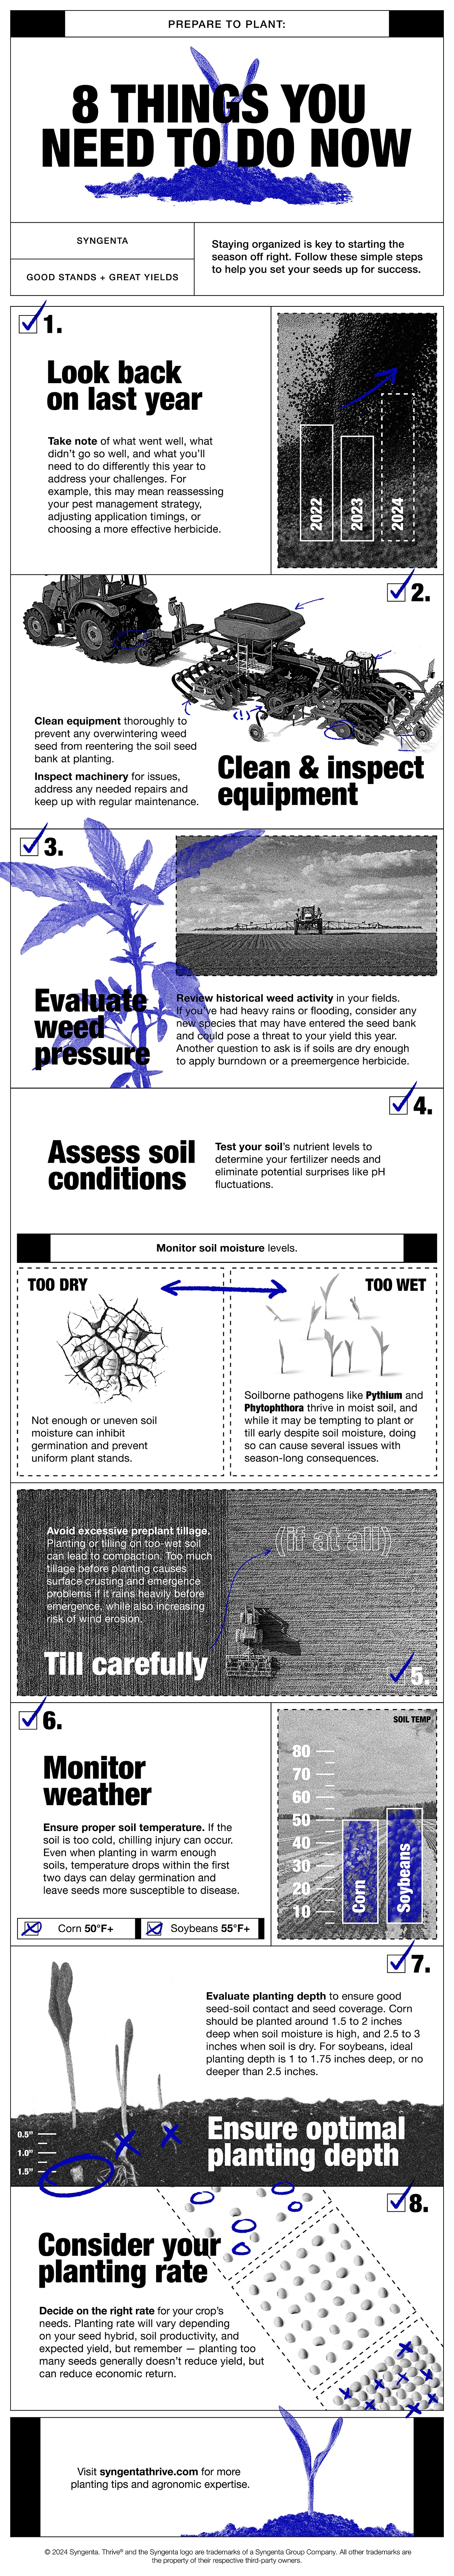 Planting prep tips infographic 